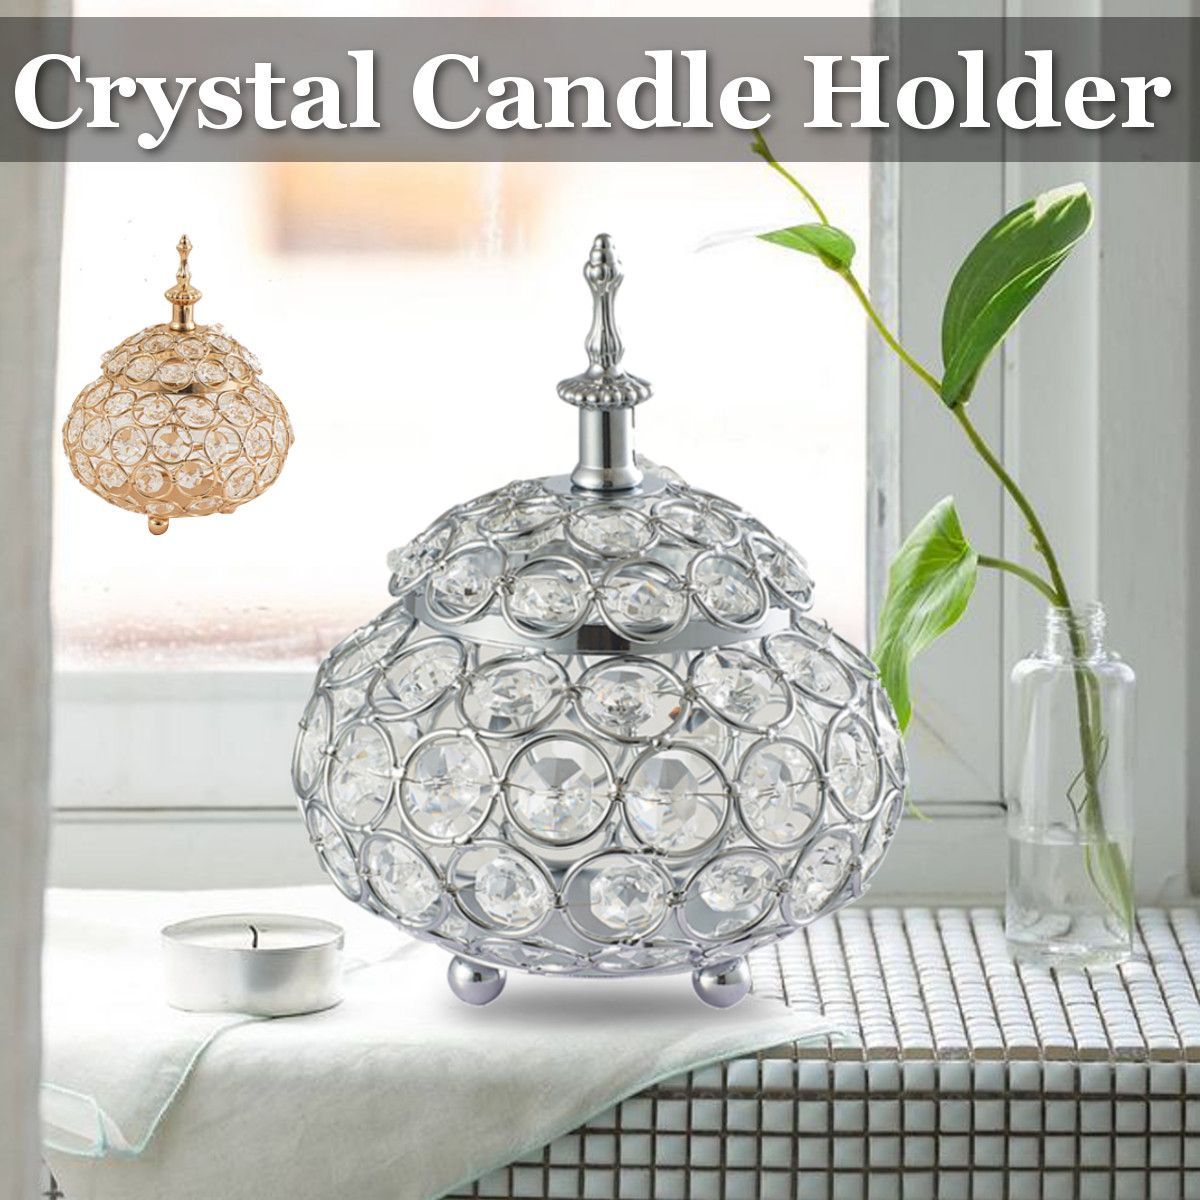 Hollow-Crystal-Tealight-Candle-Lantern-Holders-Gold-Silver-Party-Dinner-Table-Centerpieces-Home-Wedd-1724774